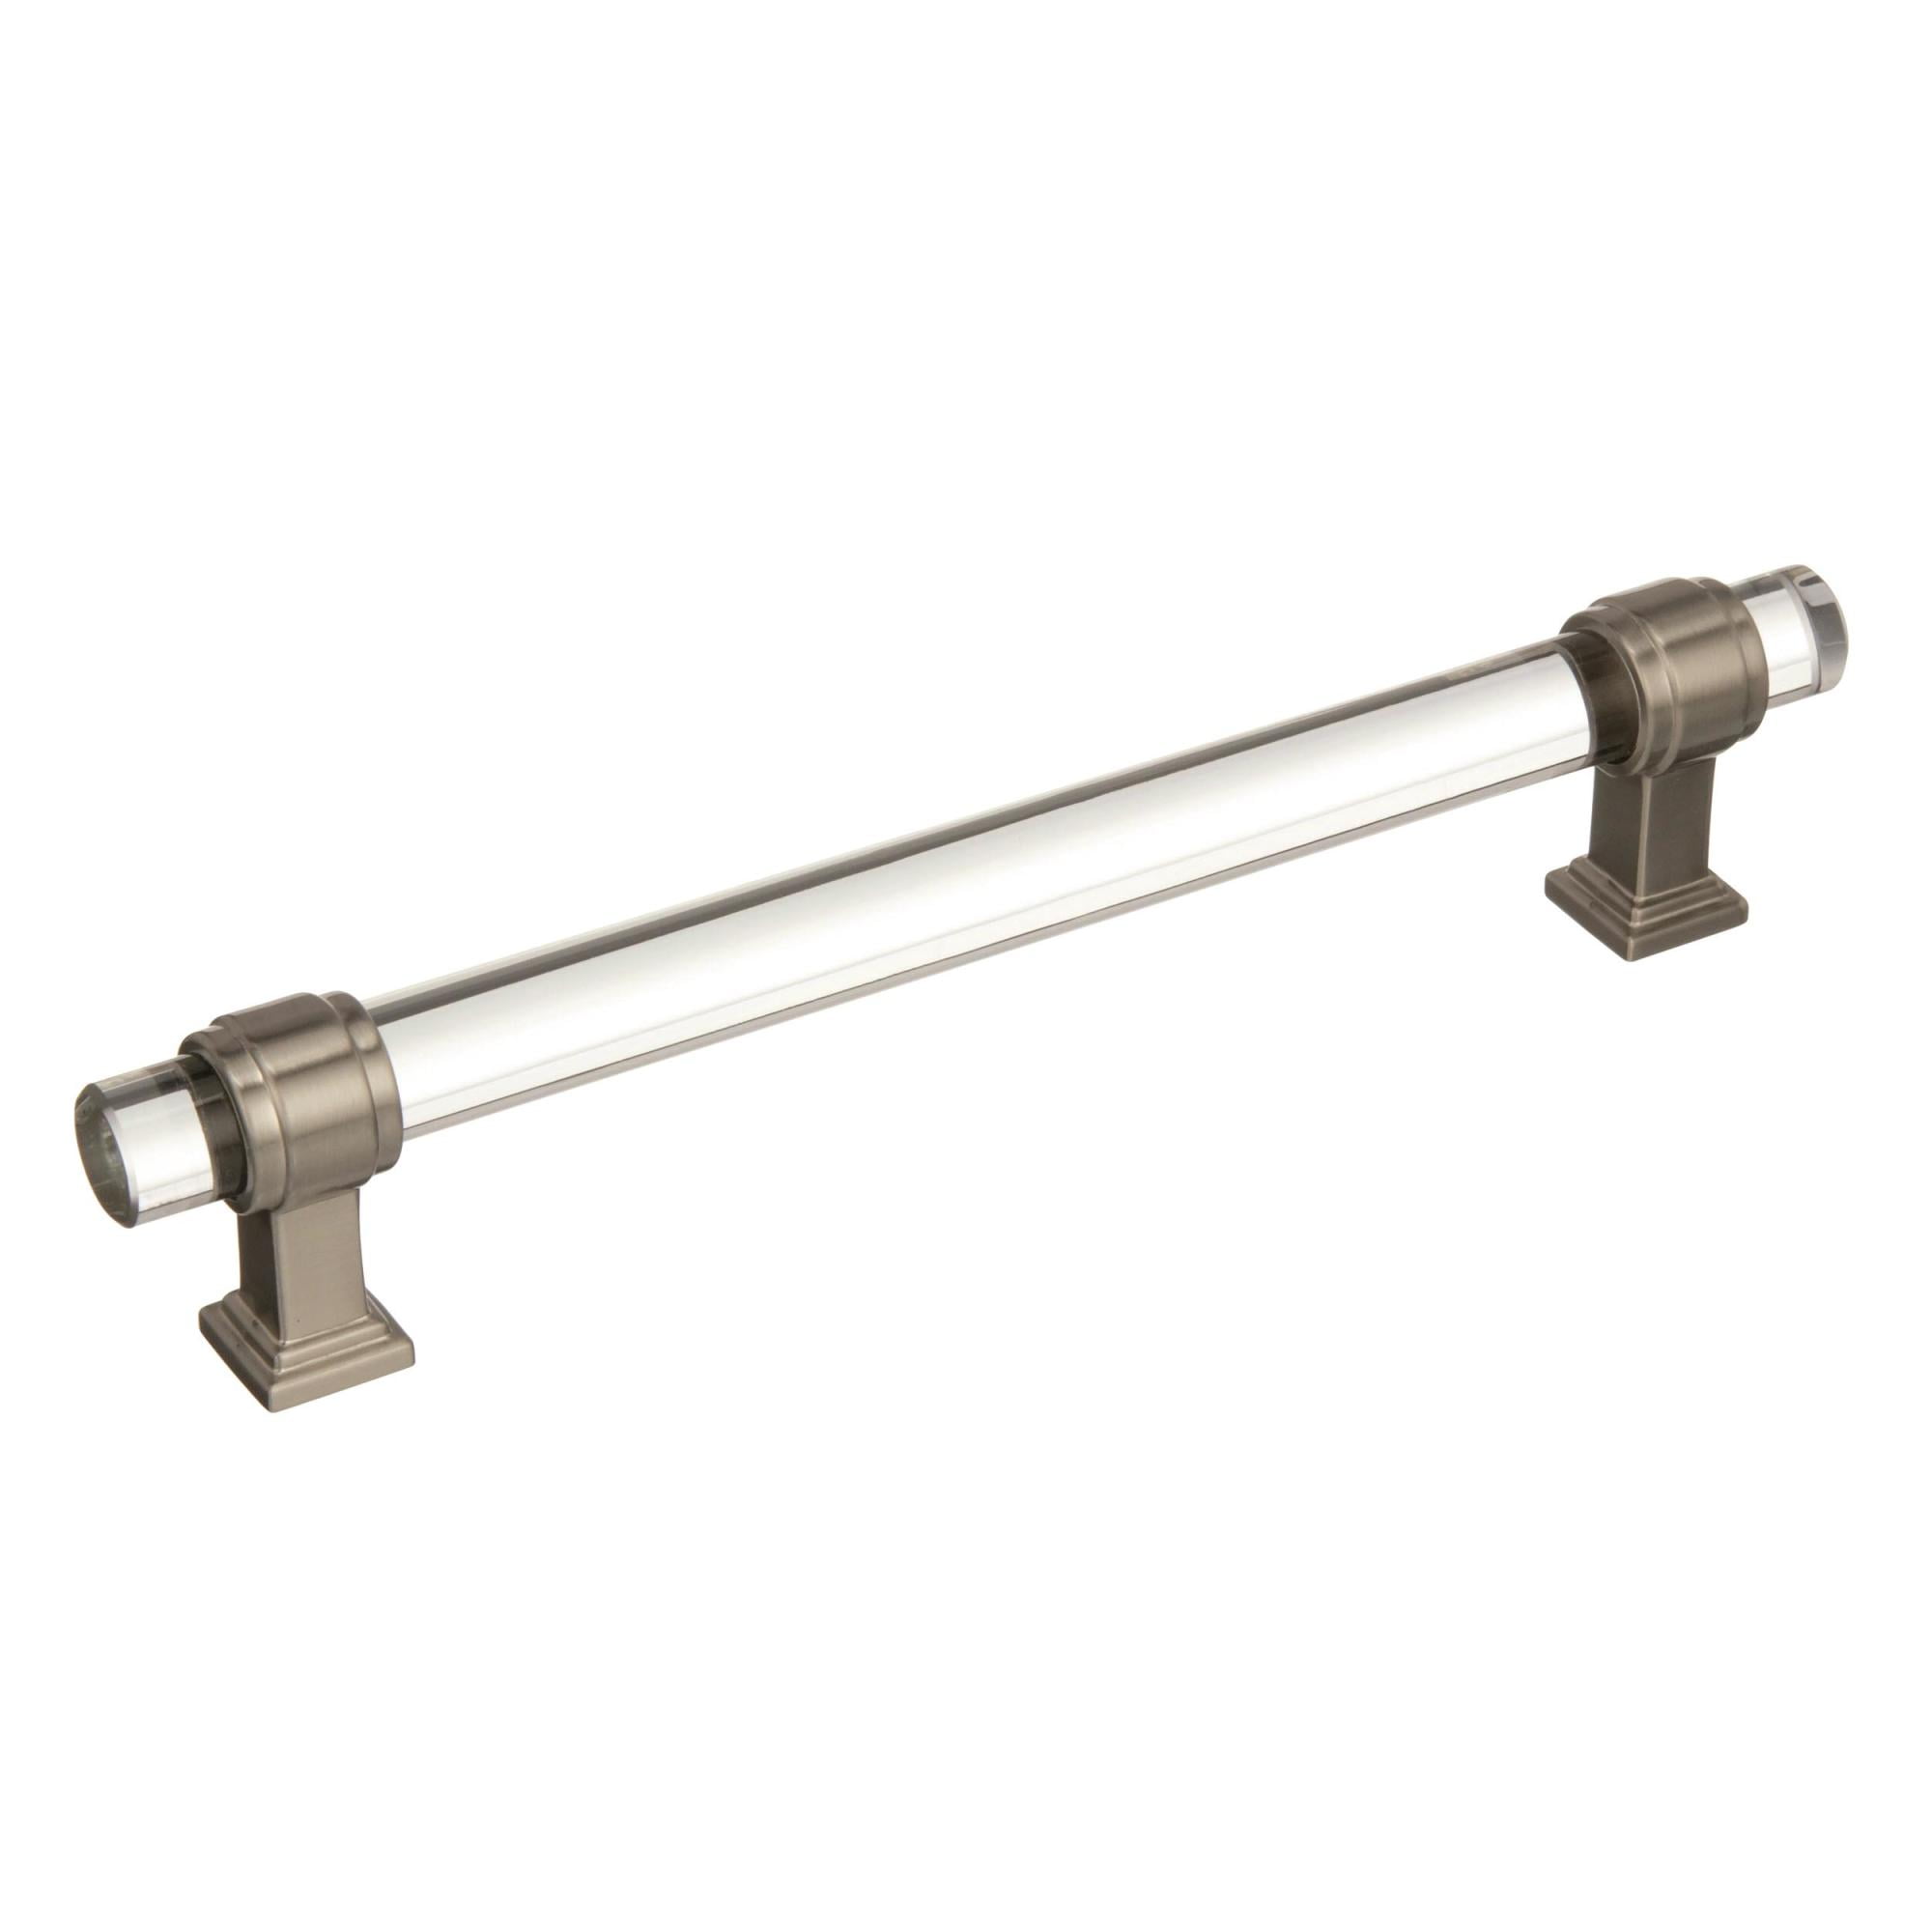 C-to-C Marble White/Polished Nickel Cabinet Pulls Amerock 5-1/16 in. 128 mm